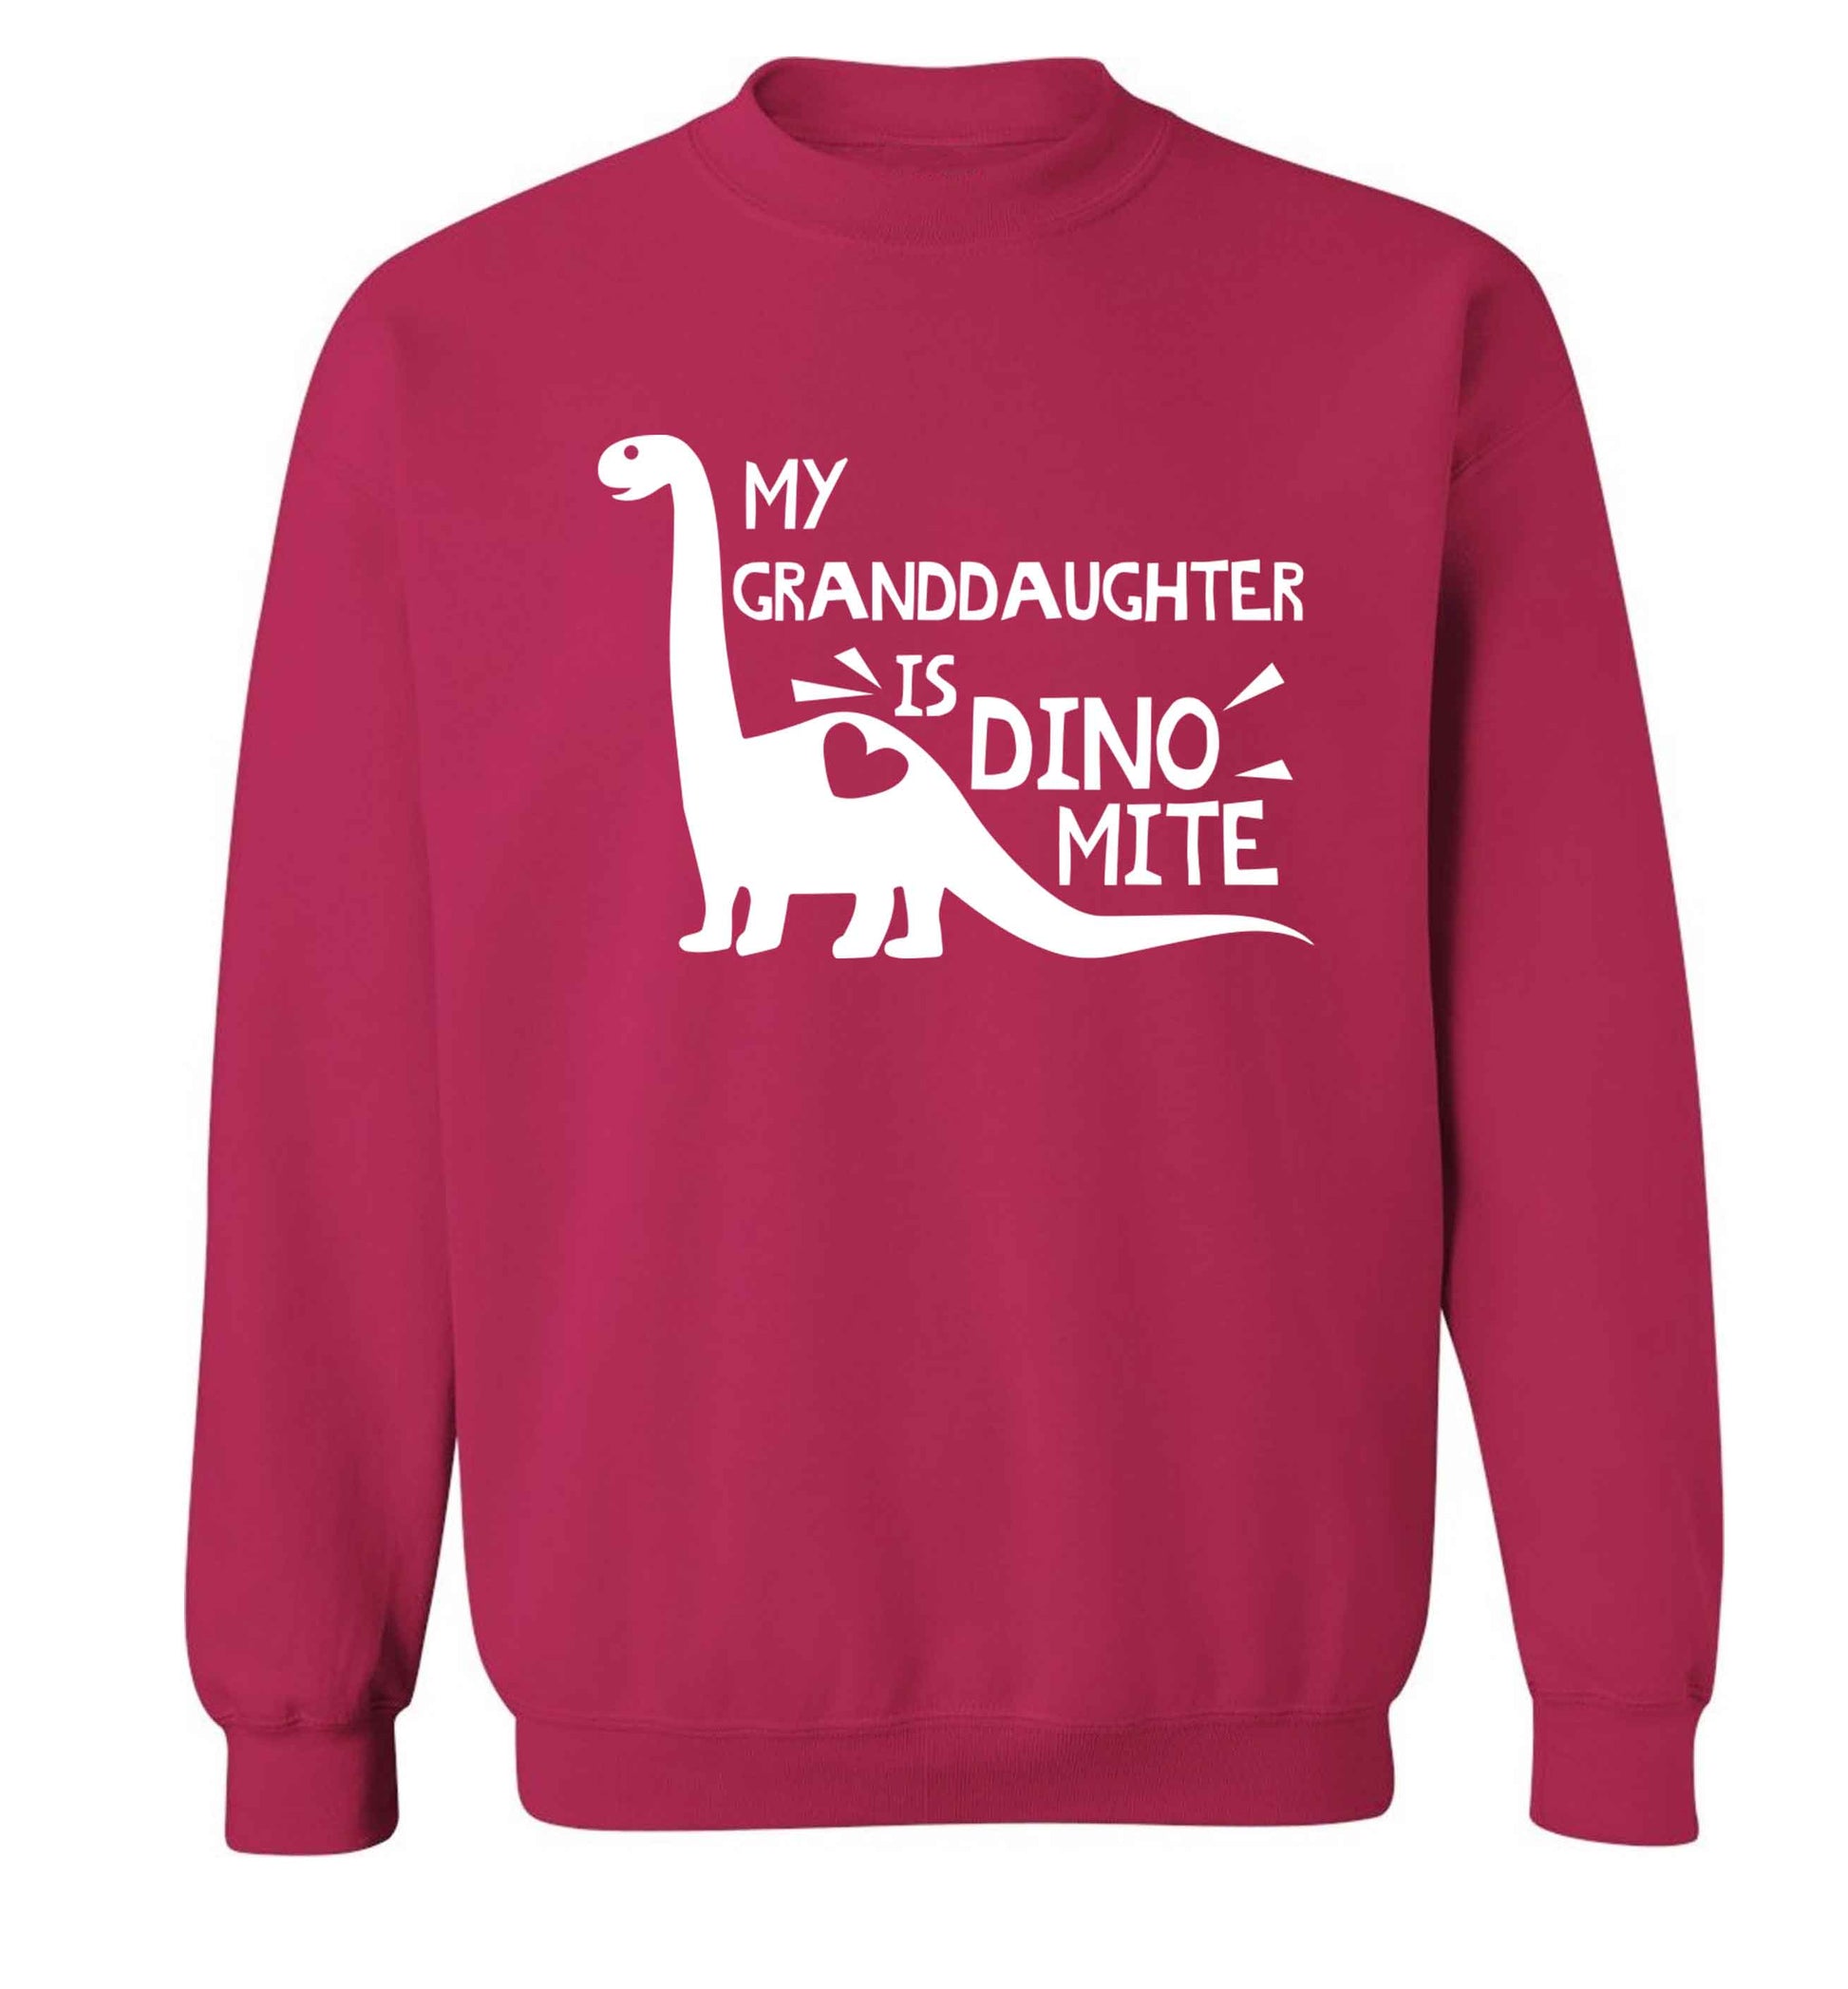 My granddaughter is dinomite! Adult's unisex pink Sweater 2XL